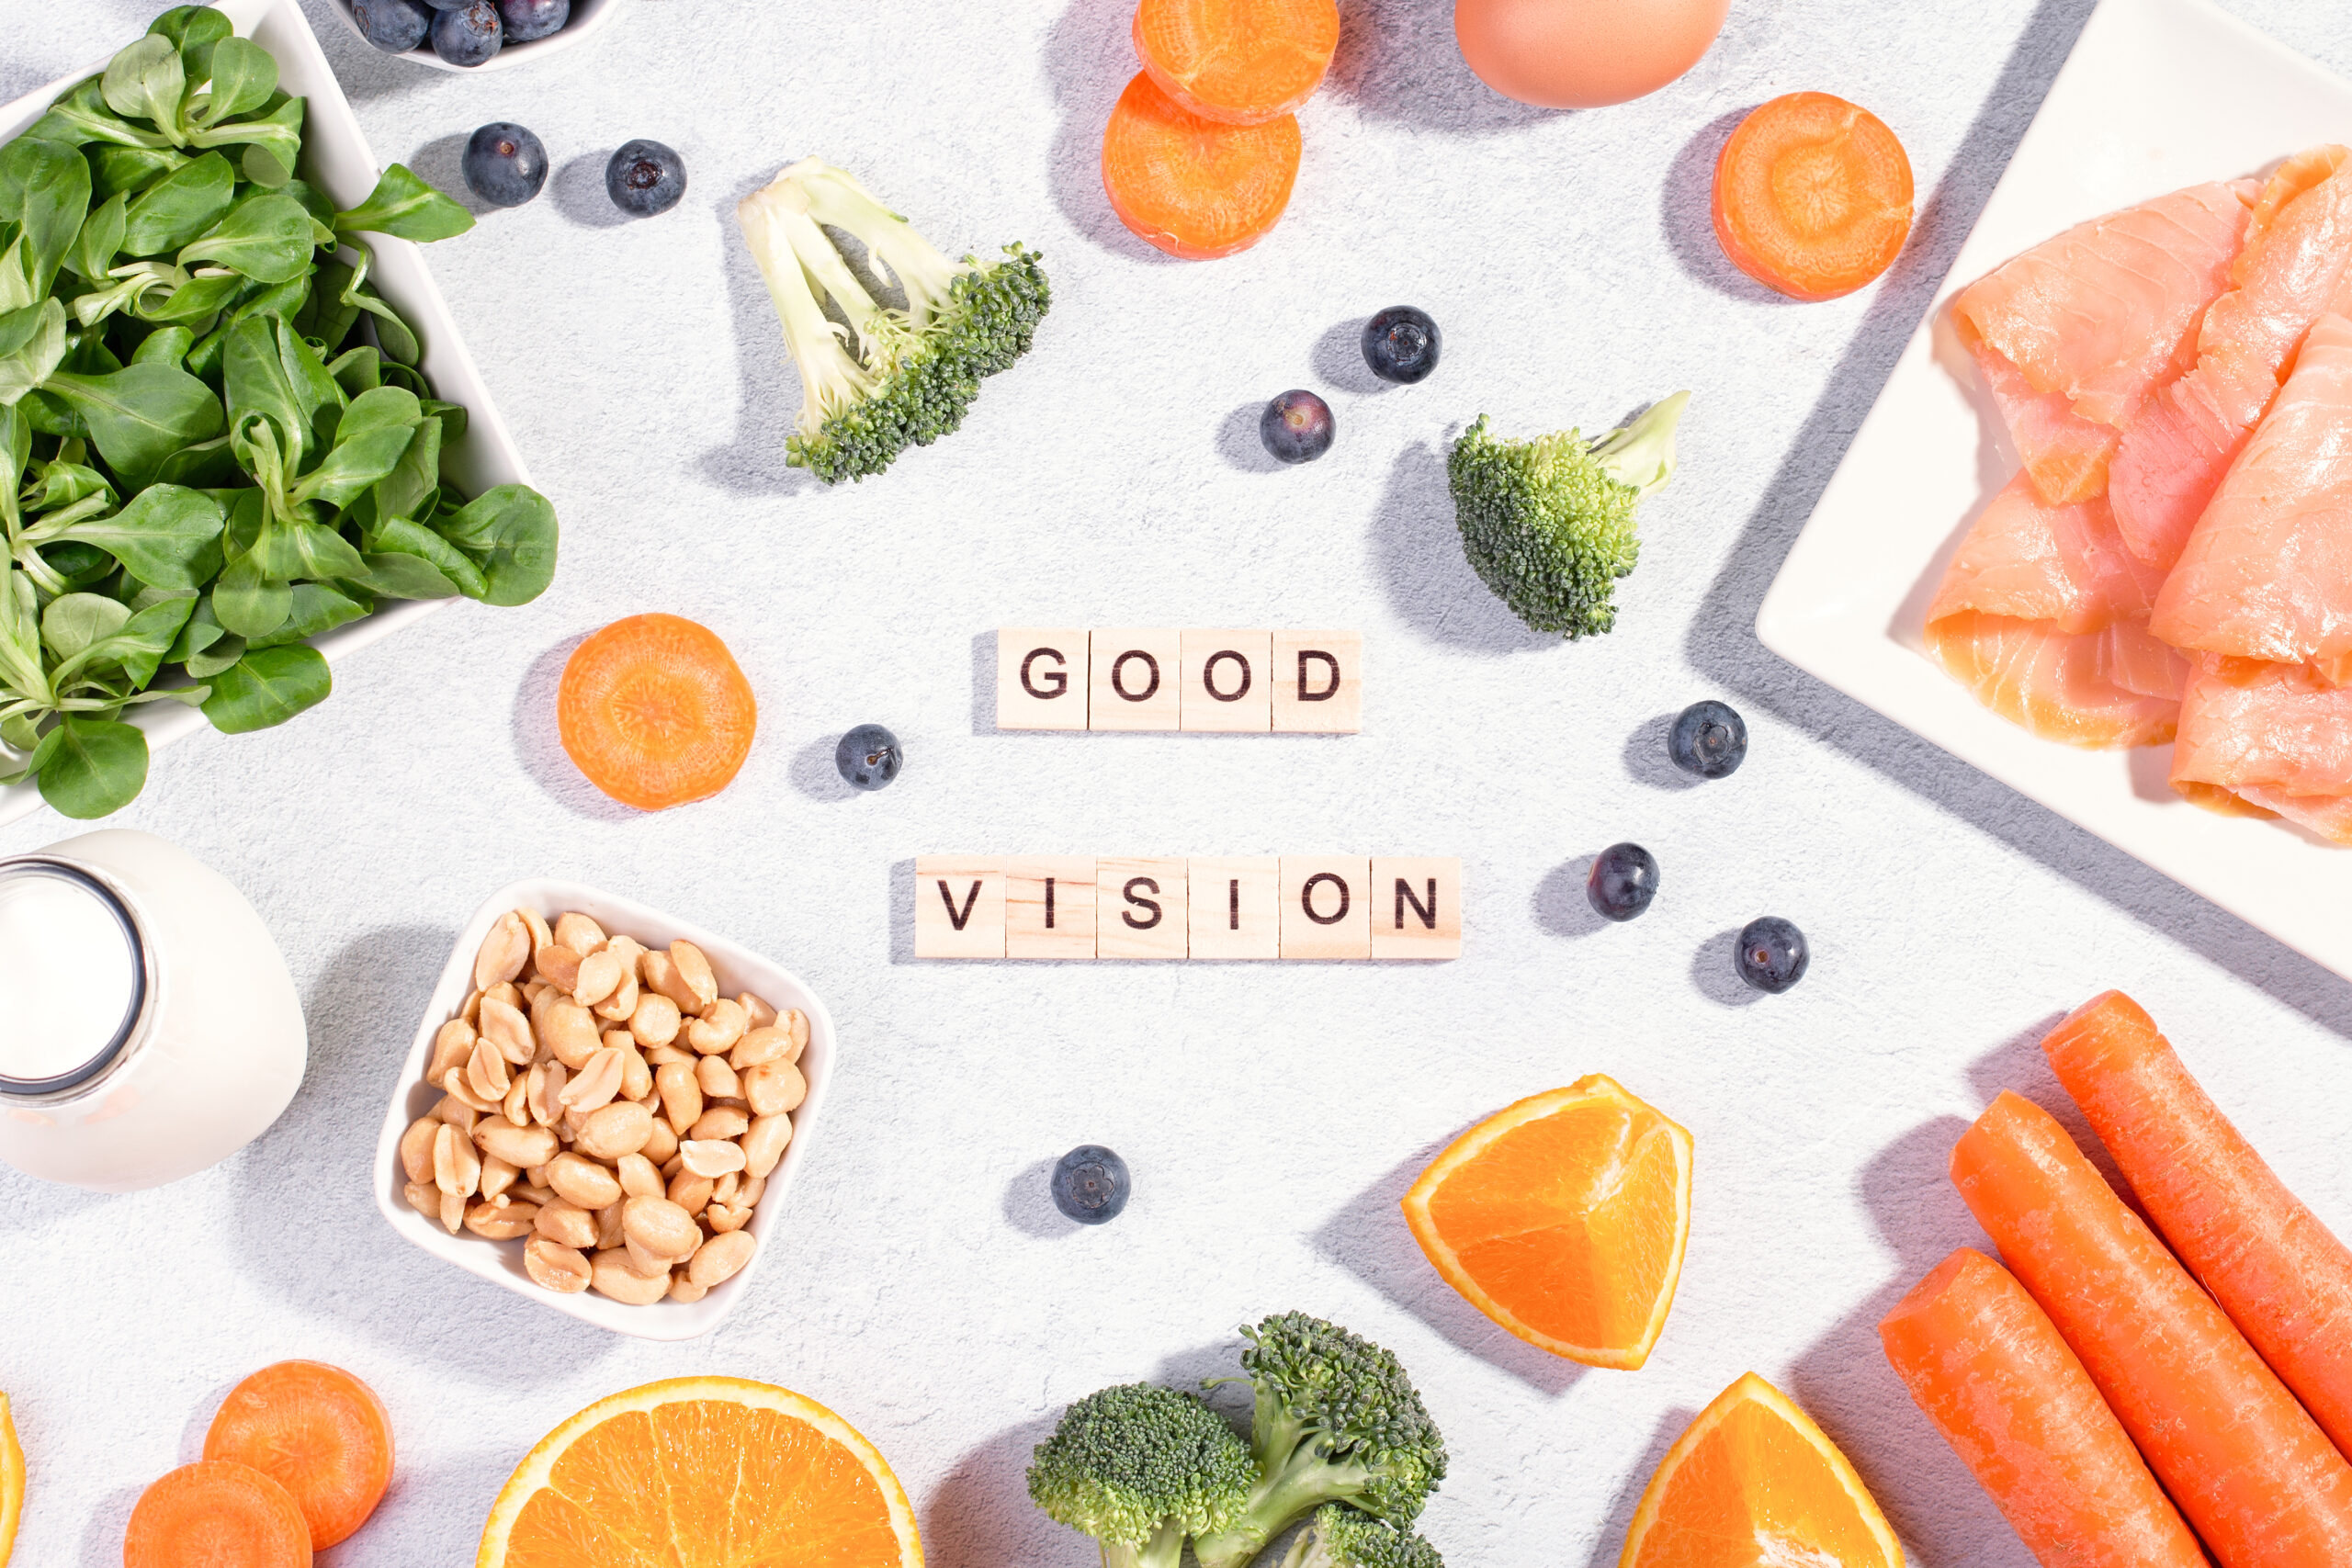 When it comes to eye health, do not overlook your diet